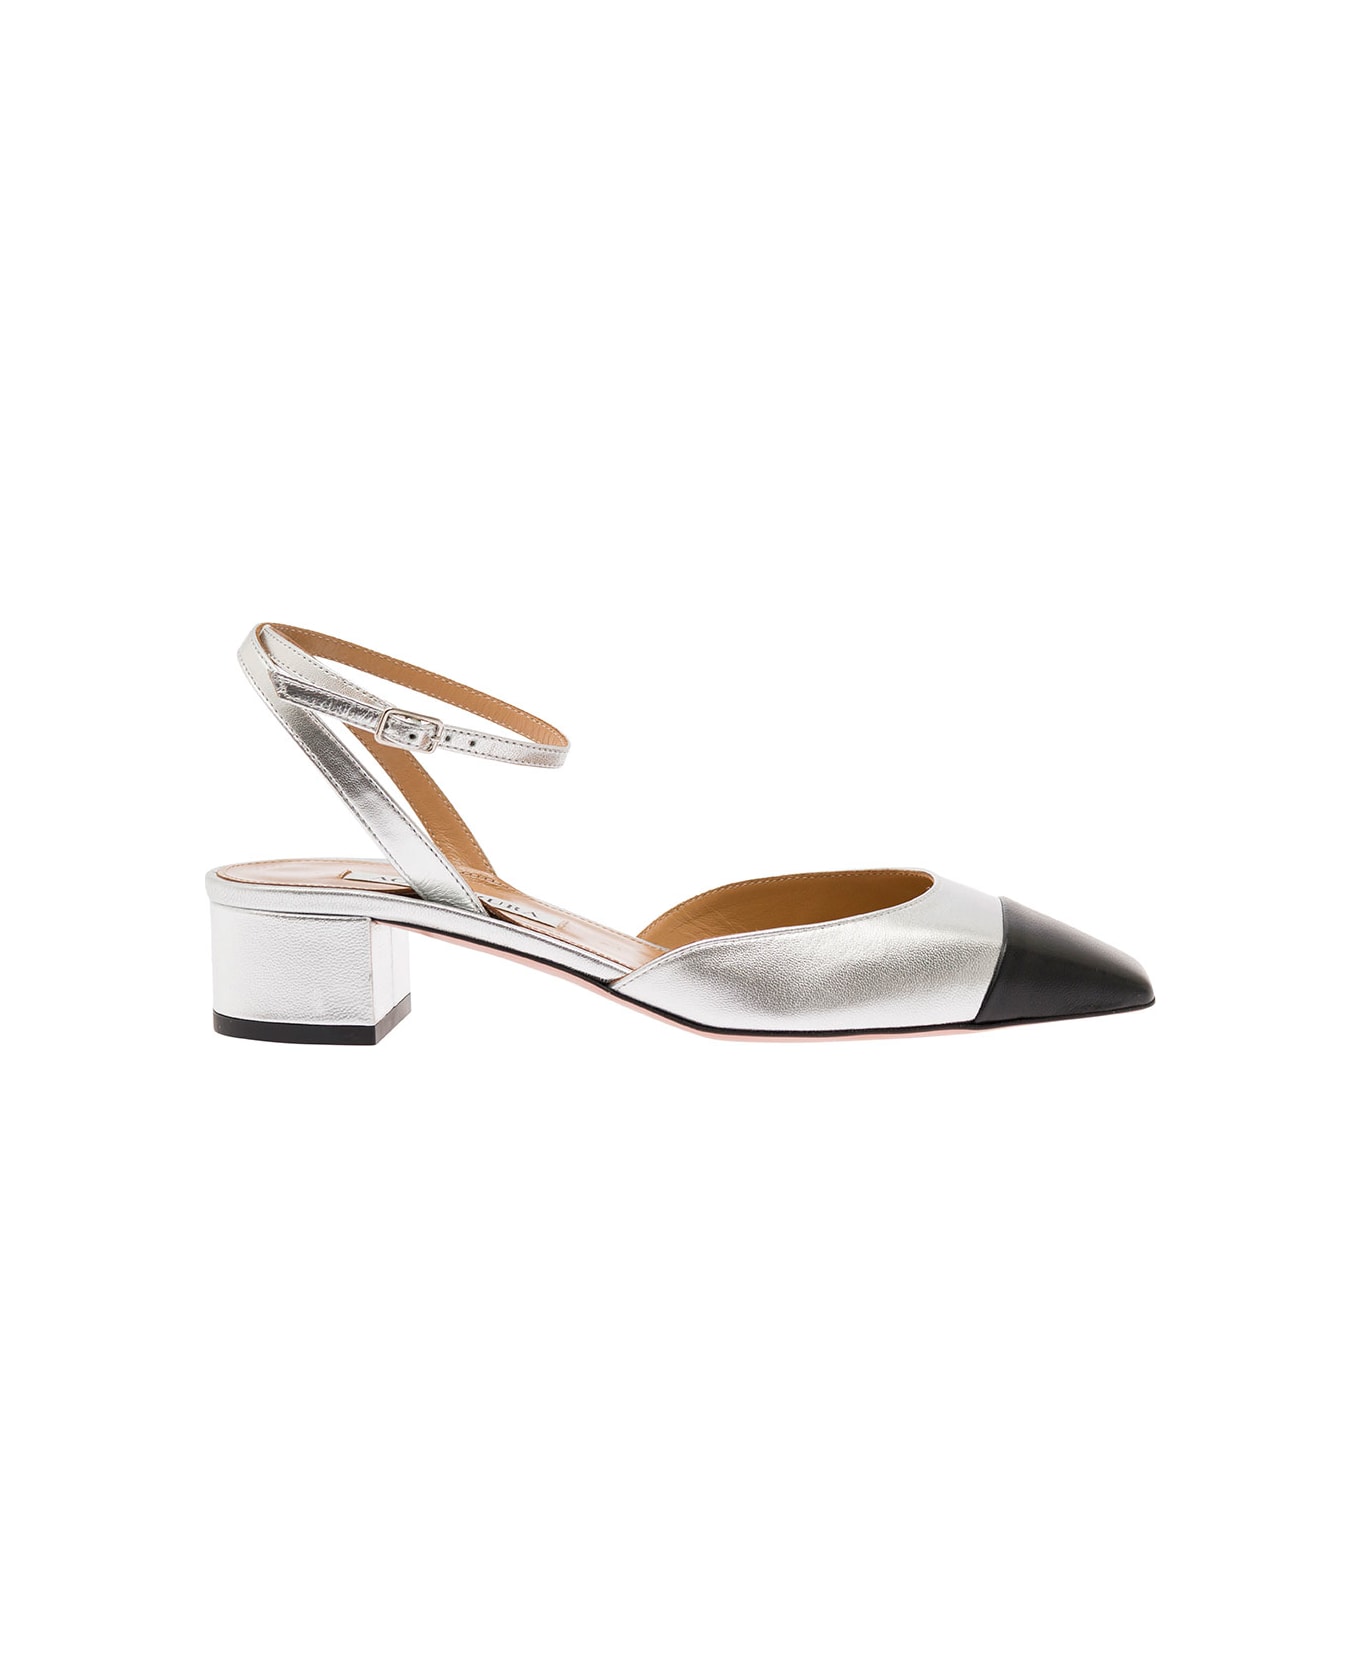 Aquazzura 'french Flirt' Silver-colored Pumps With Contrasting Toe In Laminated Leather Woman - Metallic